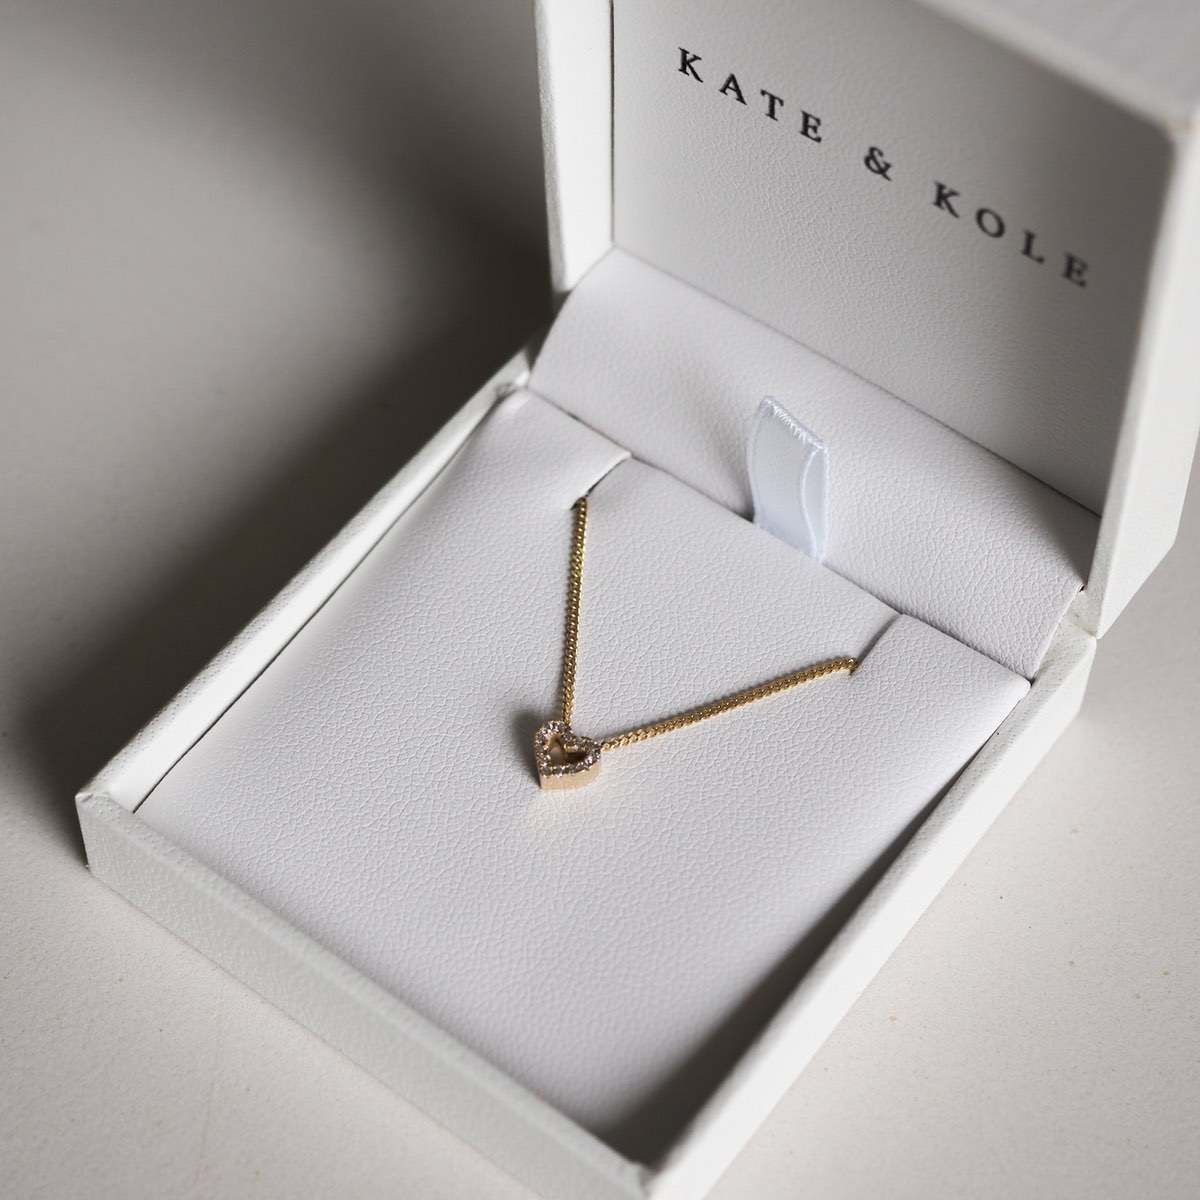 Our beautiful Diamond Heart Charm Necklace in 9ct yellow gold, sitting beautifully in a white K&K jewellery box